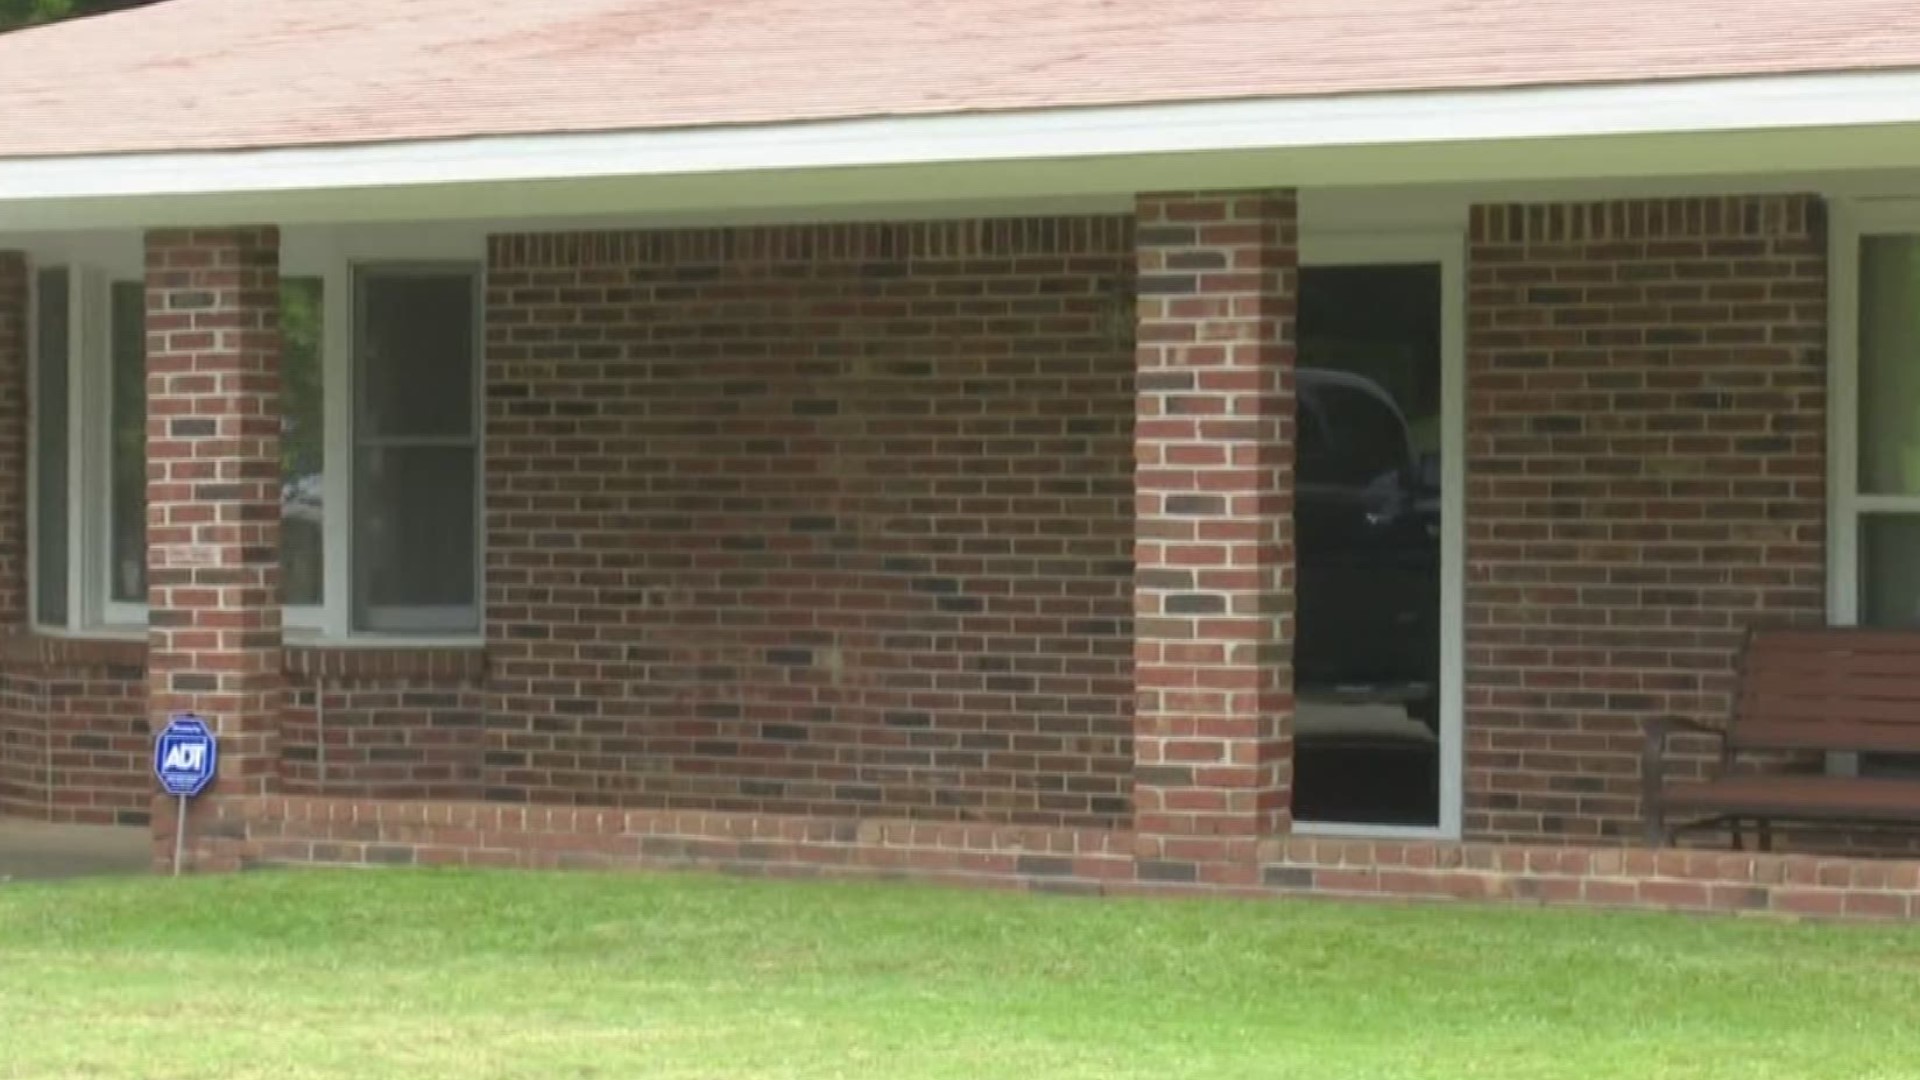 A Bibb County judge is inviting both landlords and tenants to learn about a new law that protects renters. The law says a landlord cannot evict a renter or raise their rent for reporting problems, like not repairing a roof.